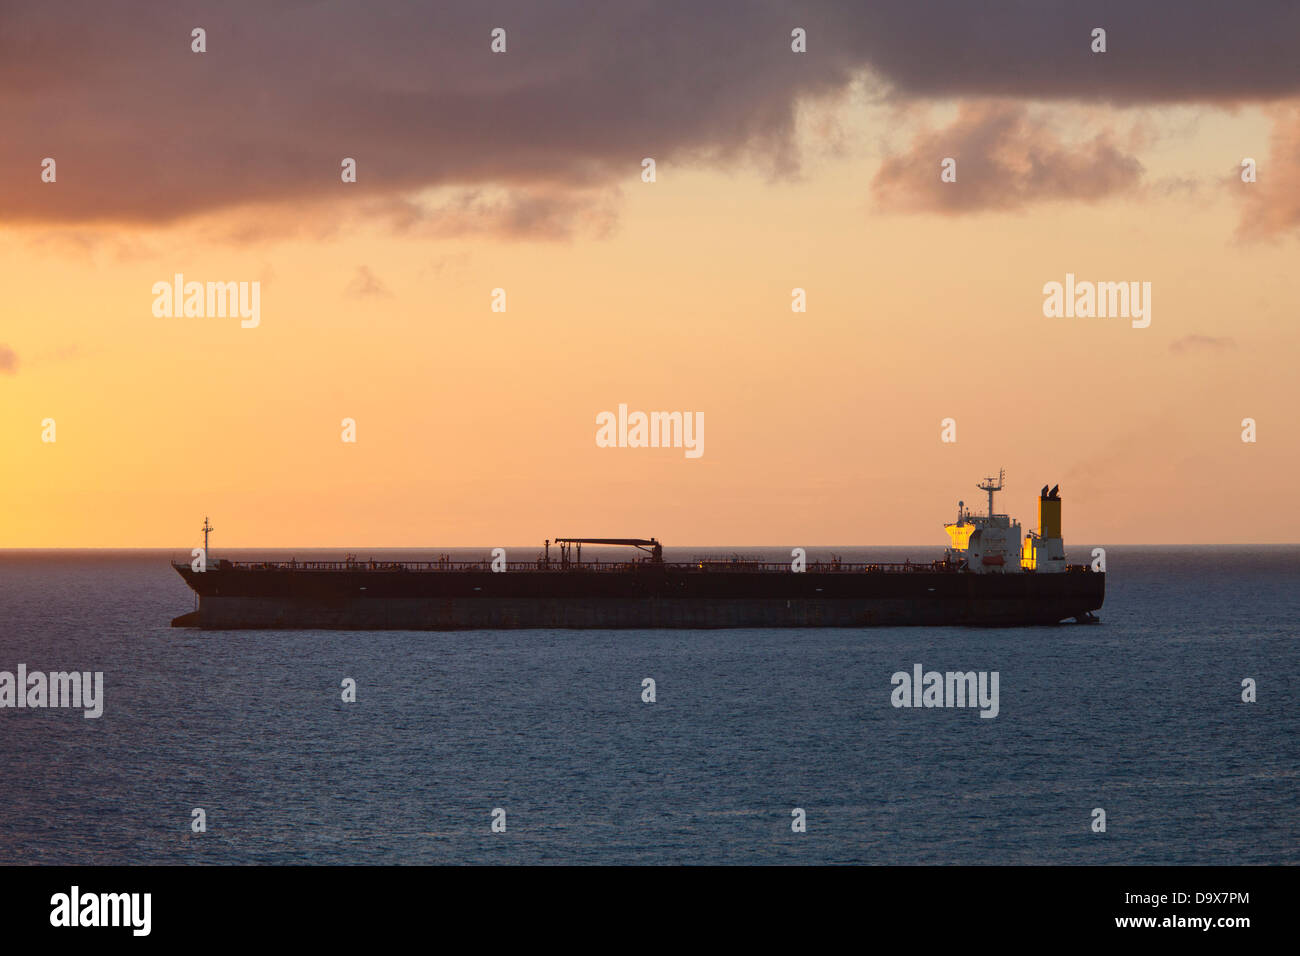 oil tanker at sea at sunset Stock Photo